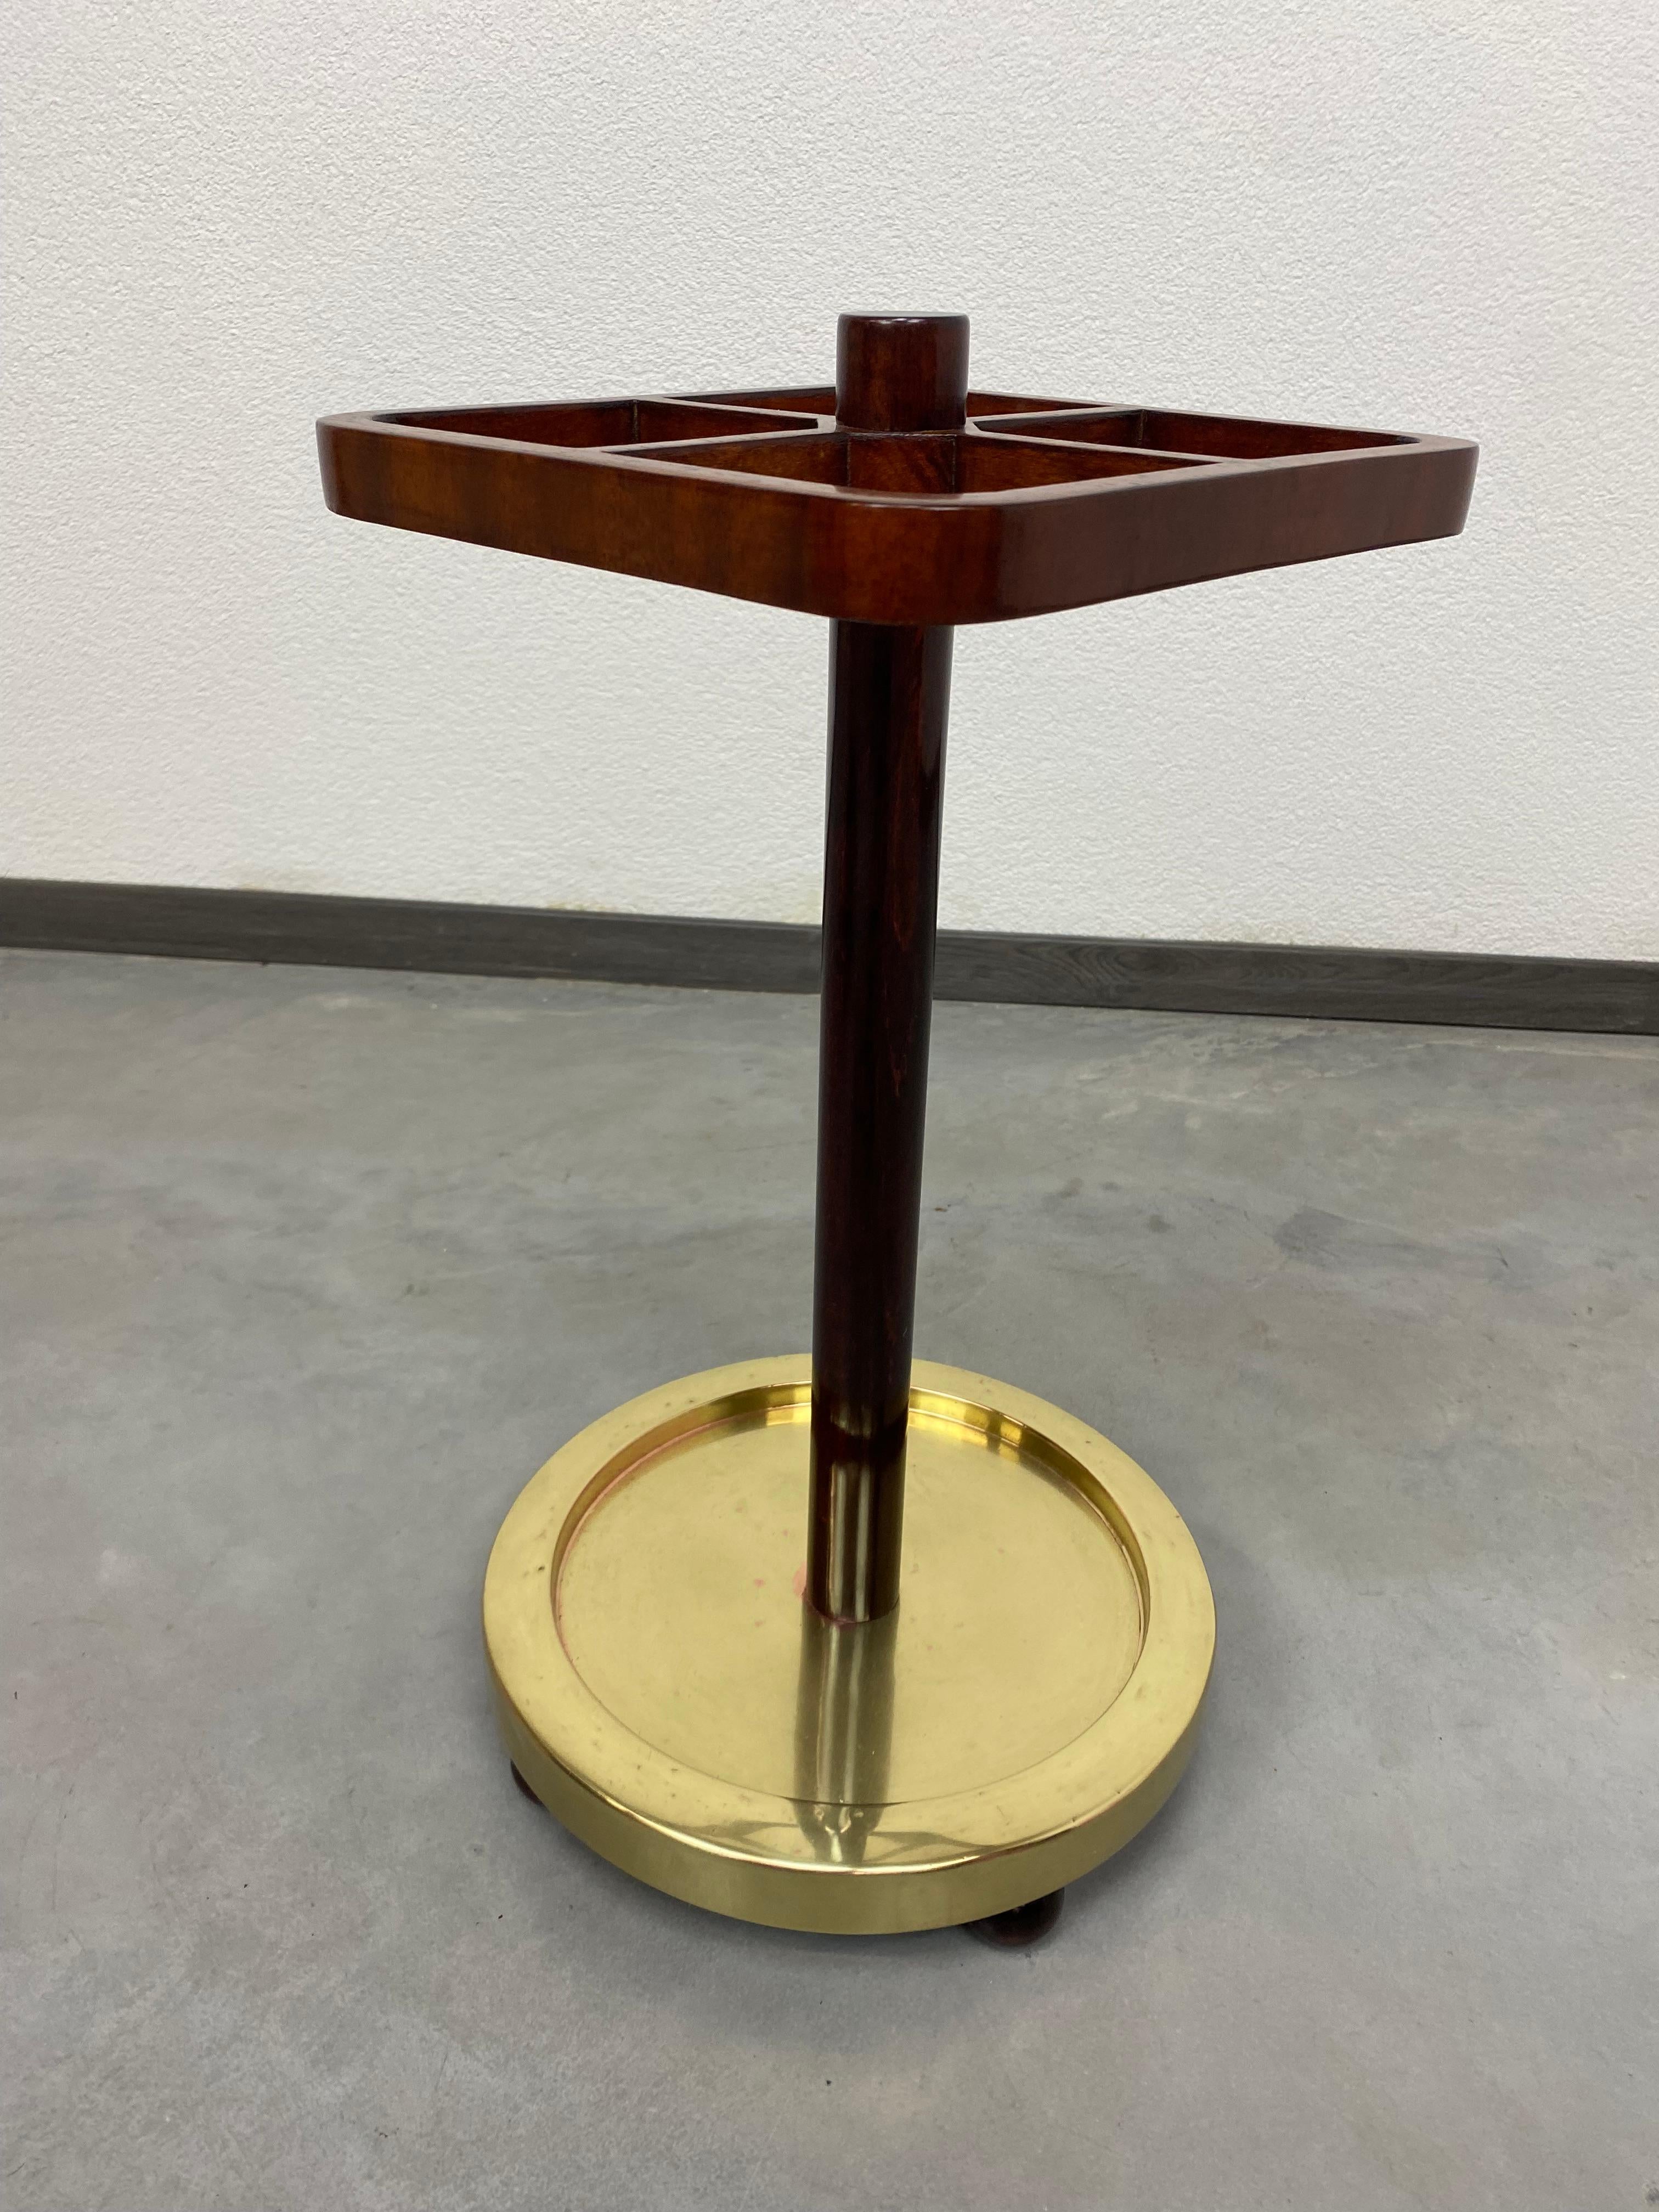 Jugendstil umbrella stand with brass base, professionally stained and repolished.